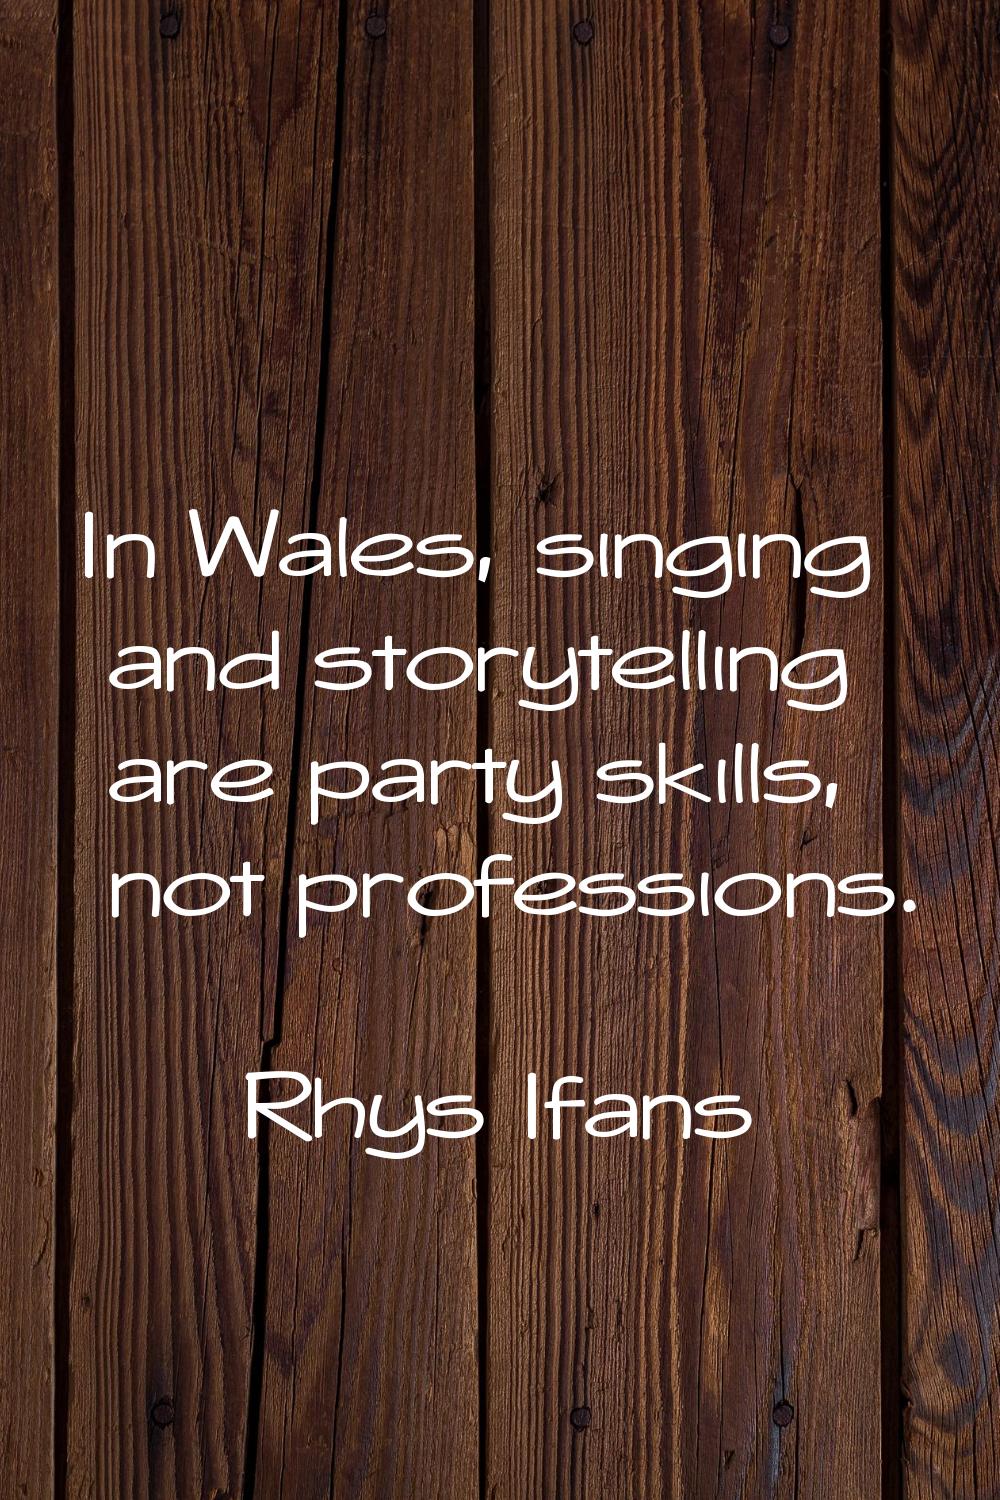 In Wales, singing and storytelling are party skills, not professions.